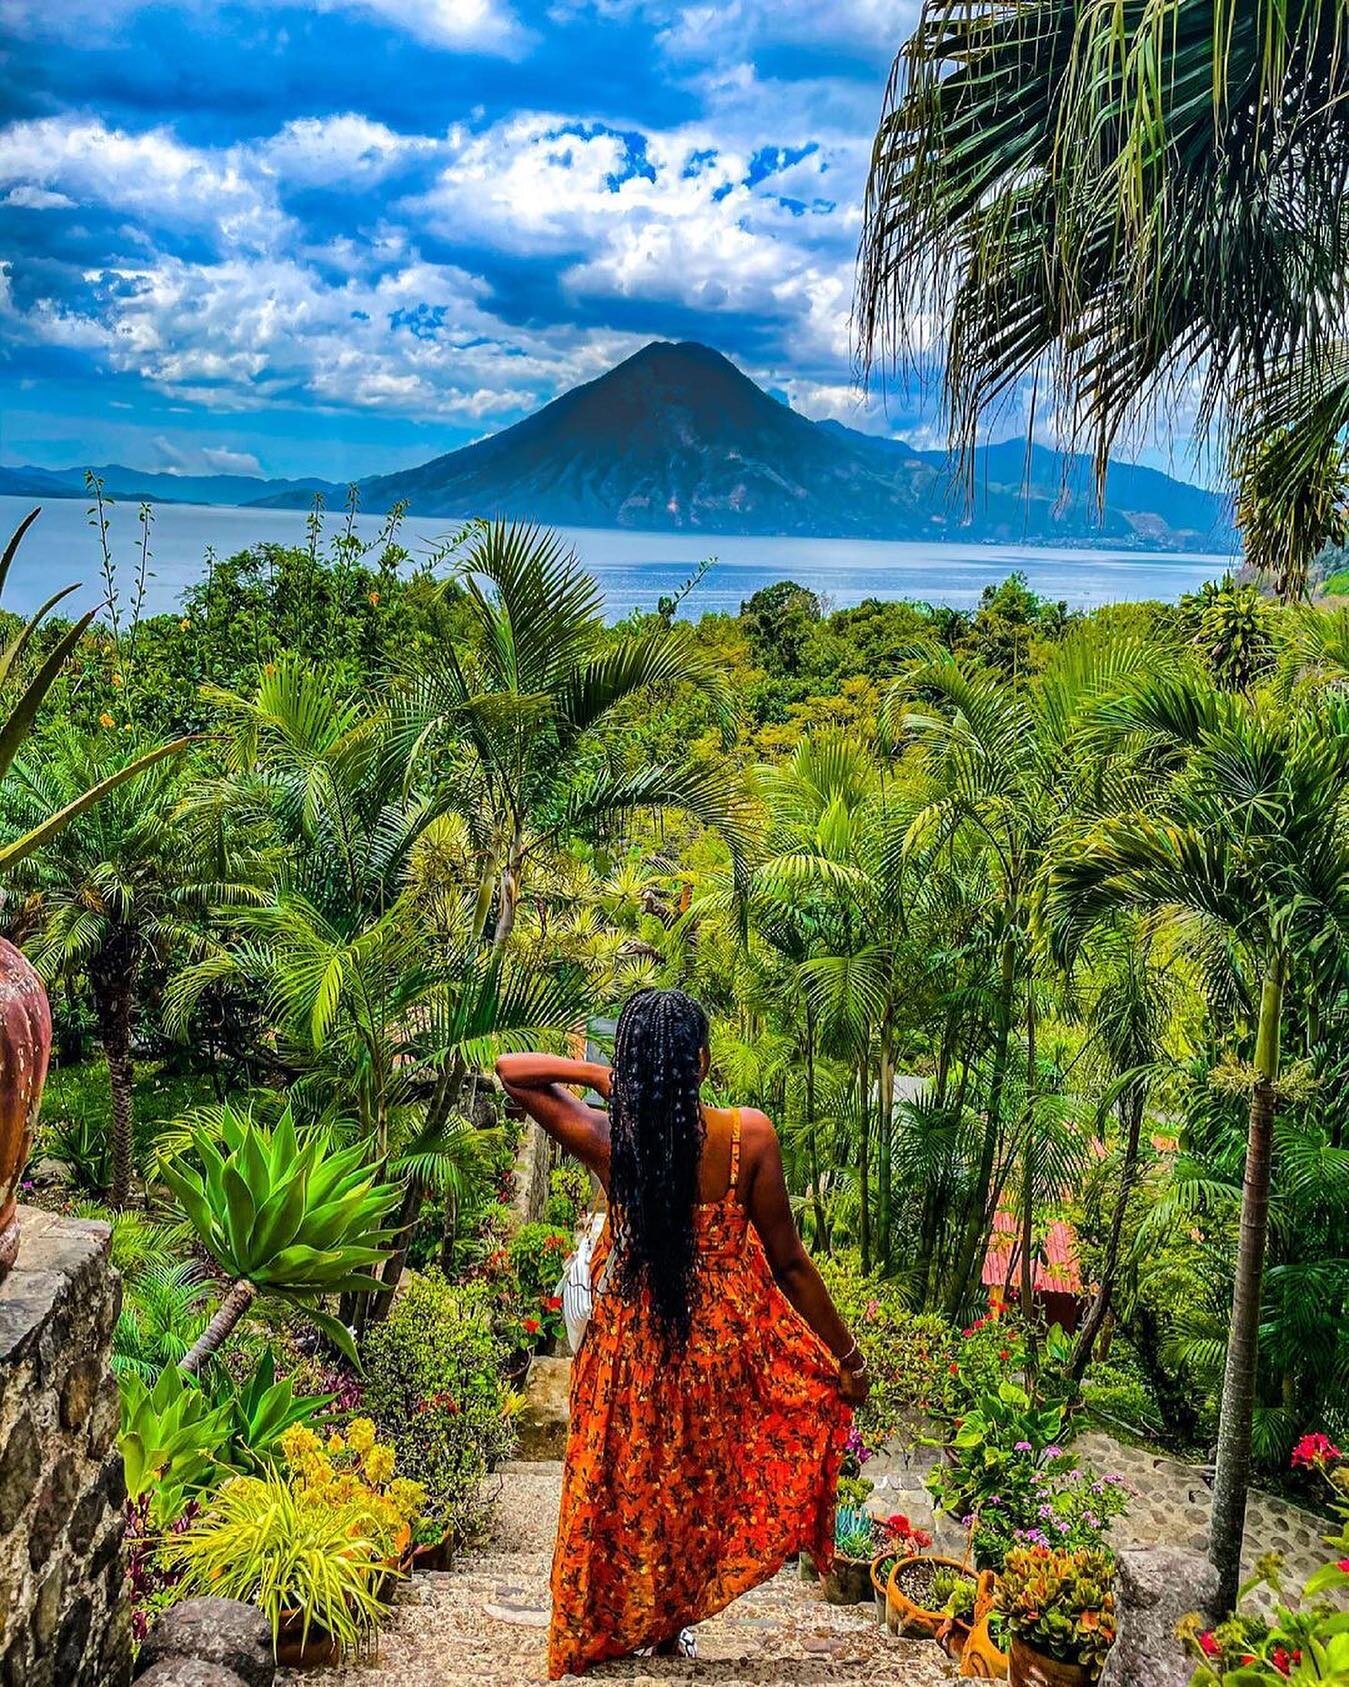 📸 #repost @kylahstravels

Come with me to a magical place ✨

A place with one of the most beautiful lakes in the world surrounded by volcanoes. A place rich in indigenous Mayan culture and a bunch of positive vibes. A place where Spanish is taught a